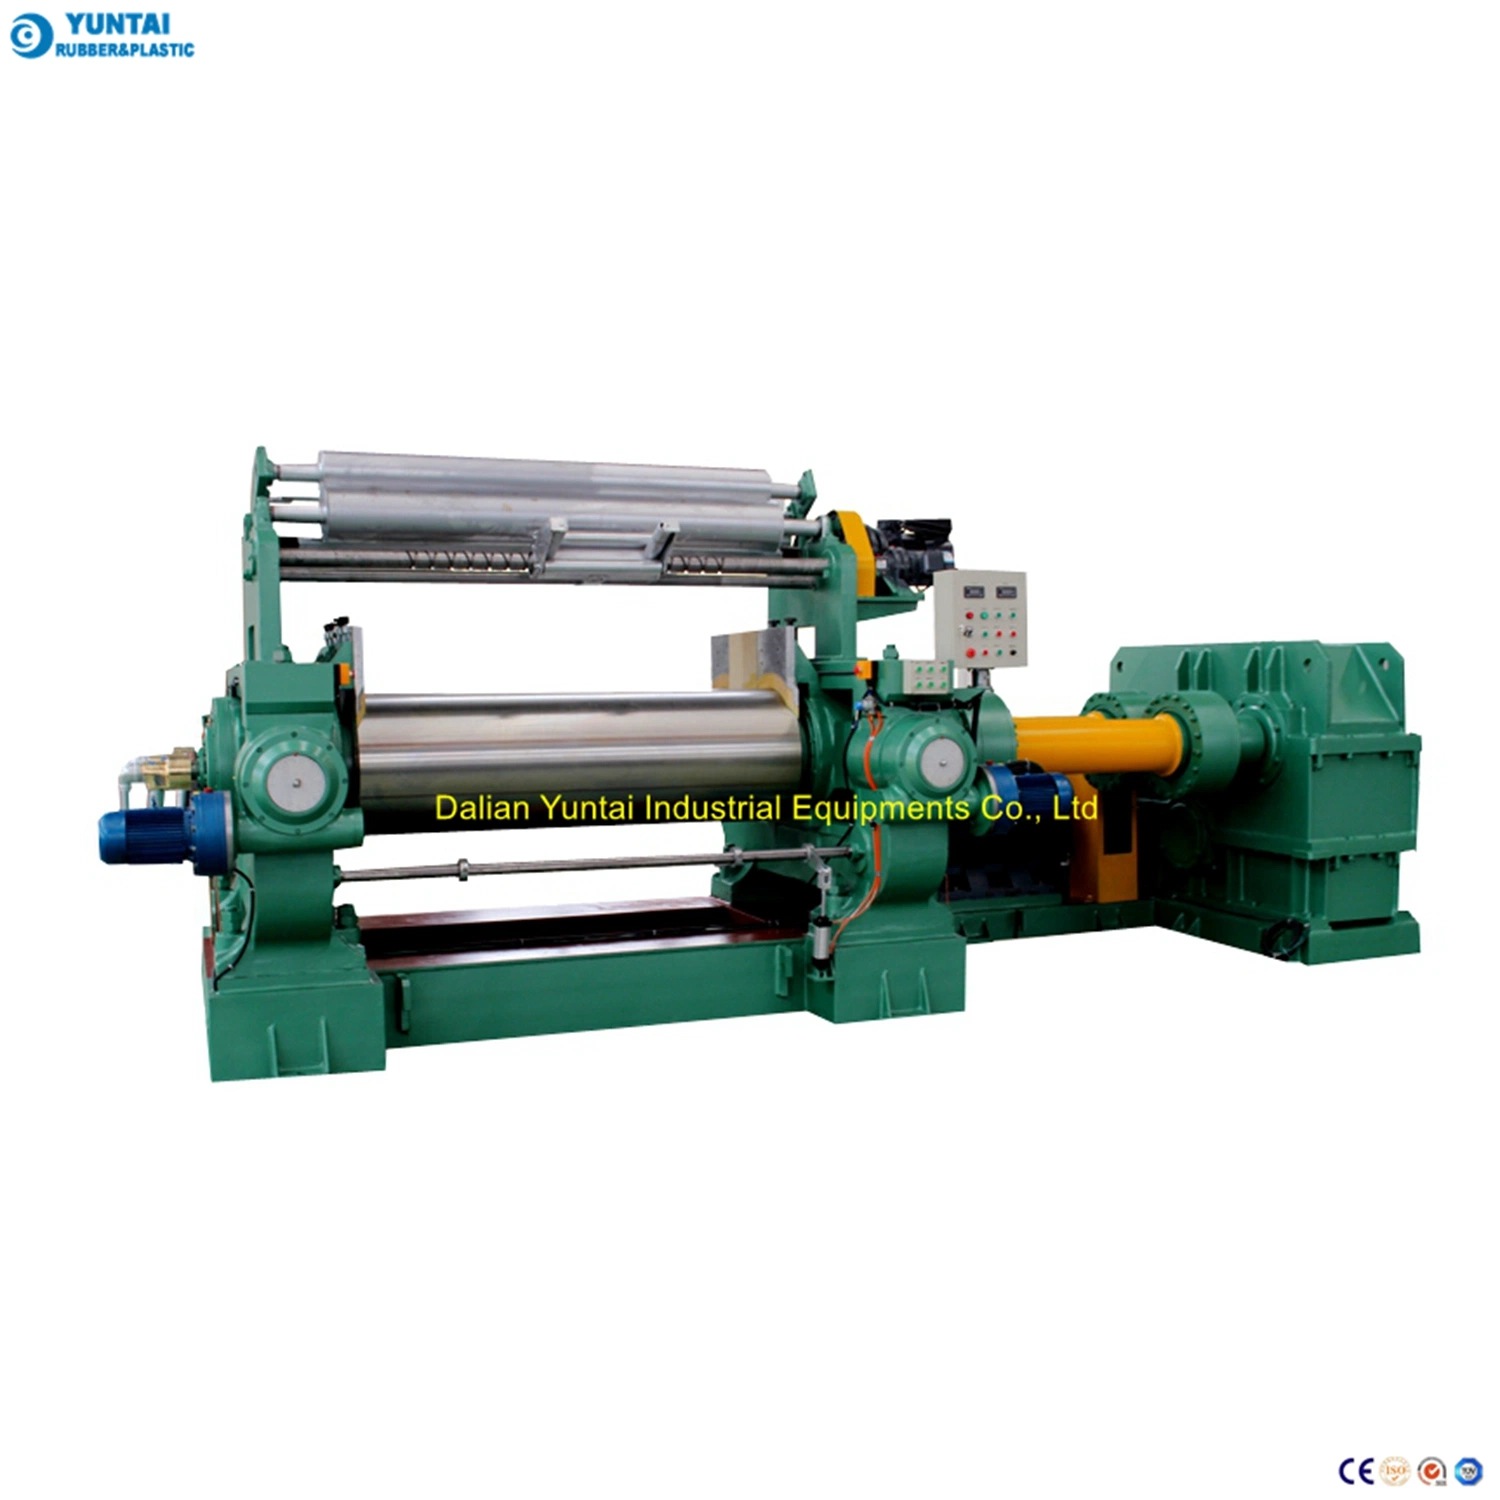 Ce Approval Bearing Rolls Xk-610X1730 Rubber Mixing Mill Machine